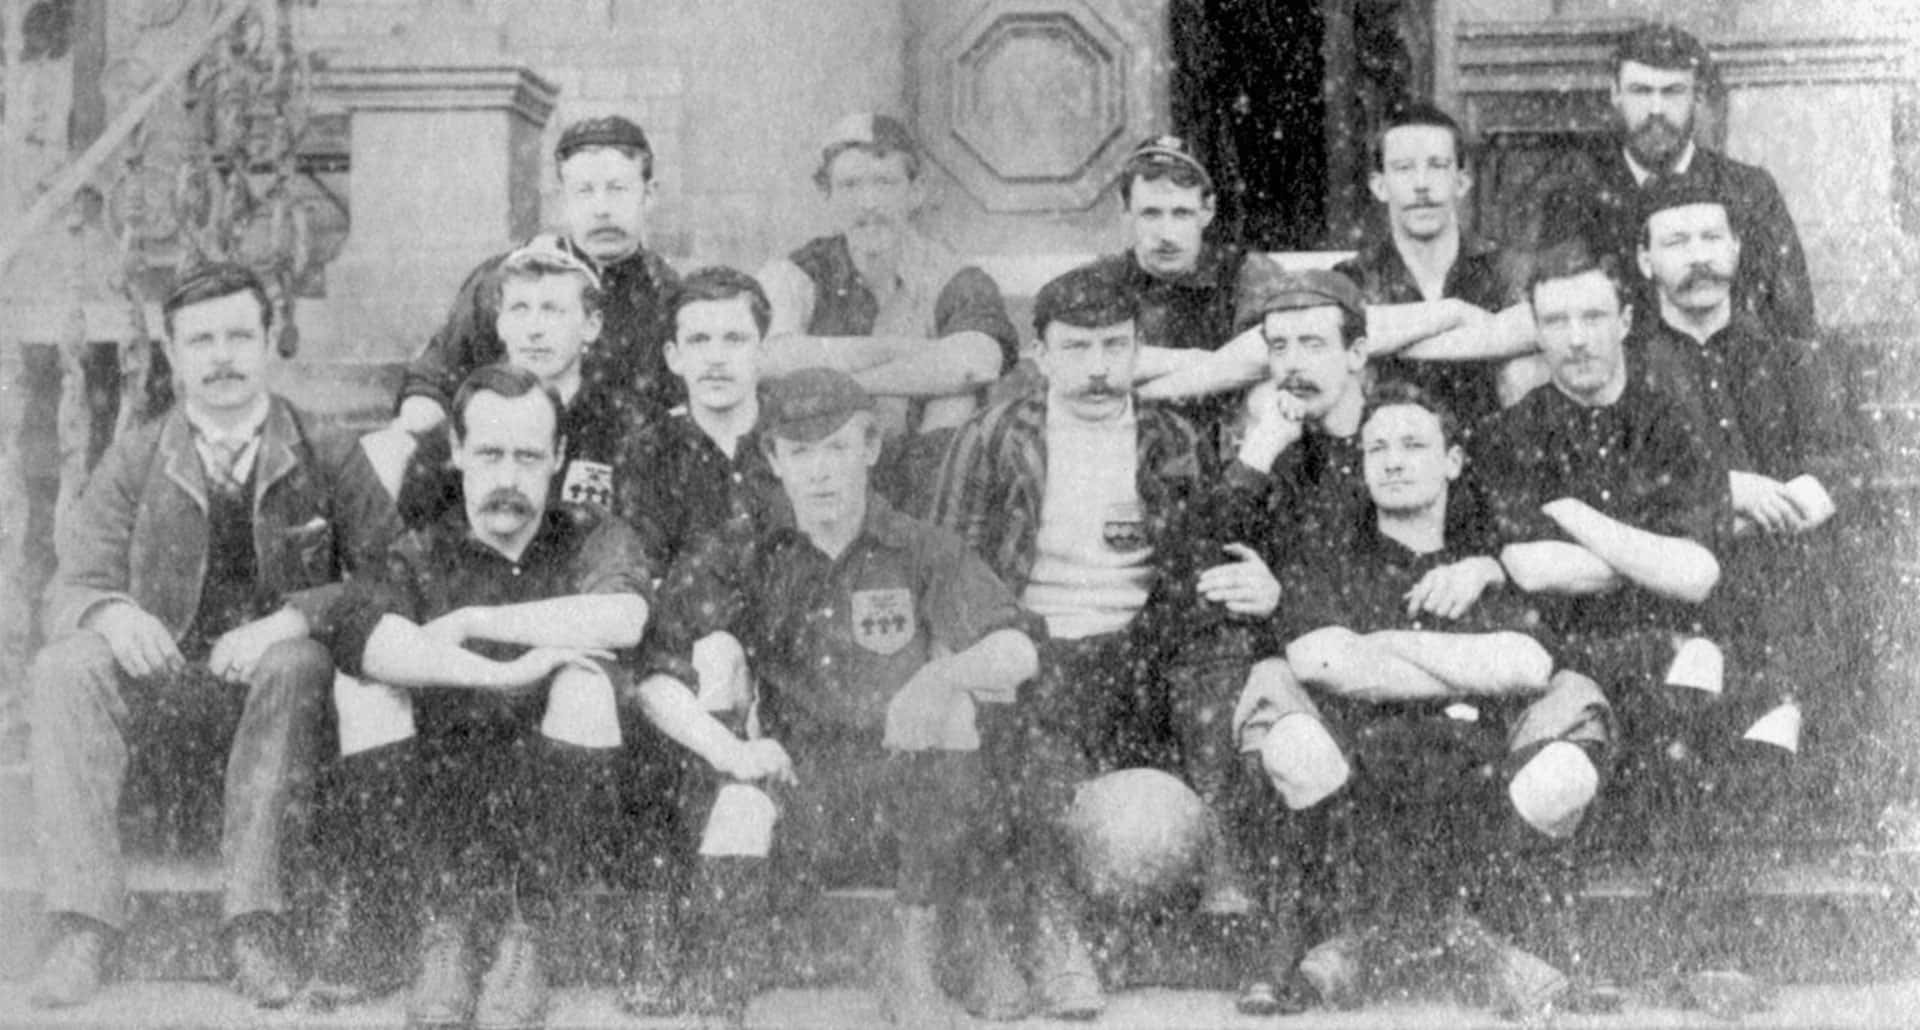 Sheffield FC historical players